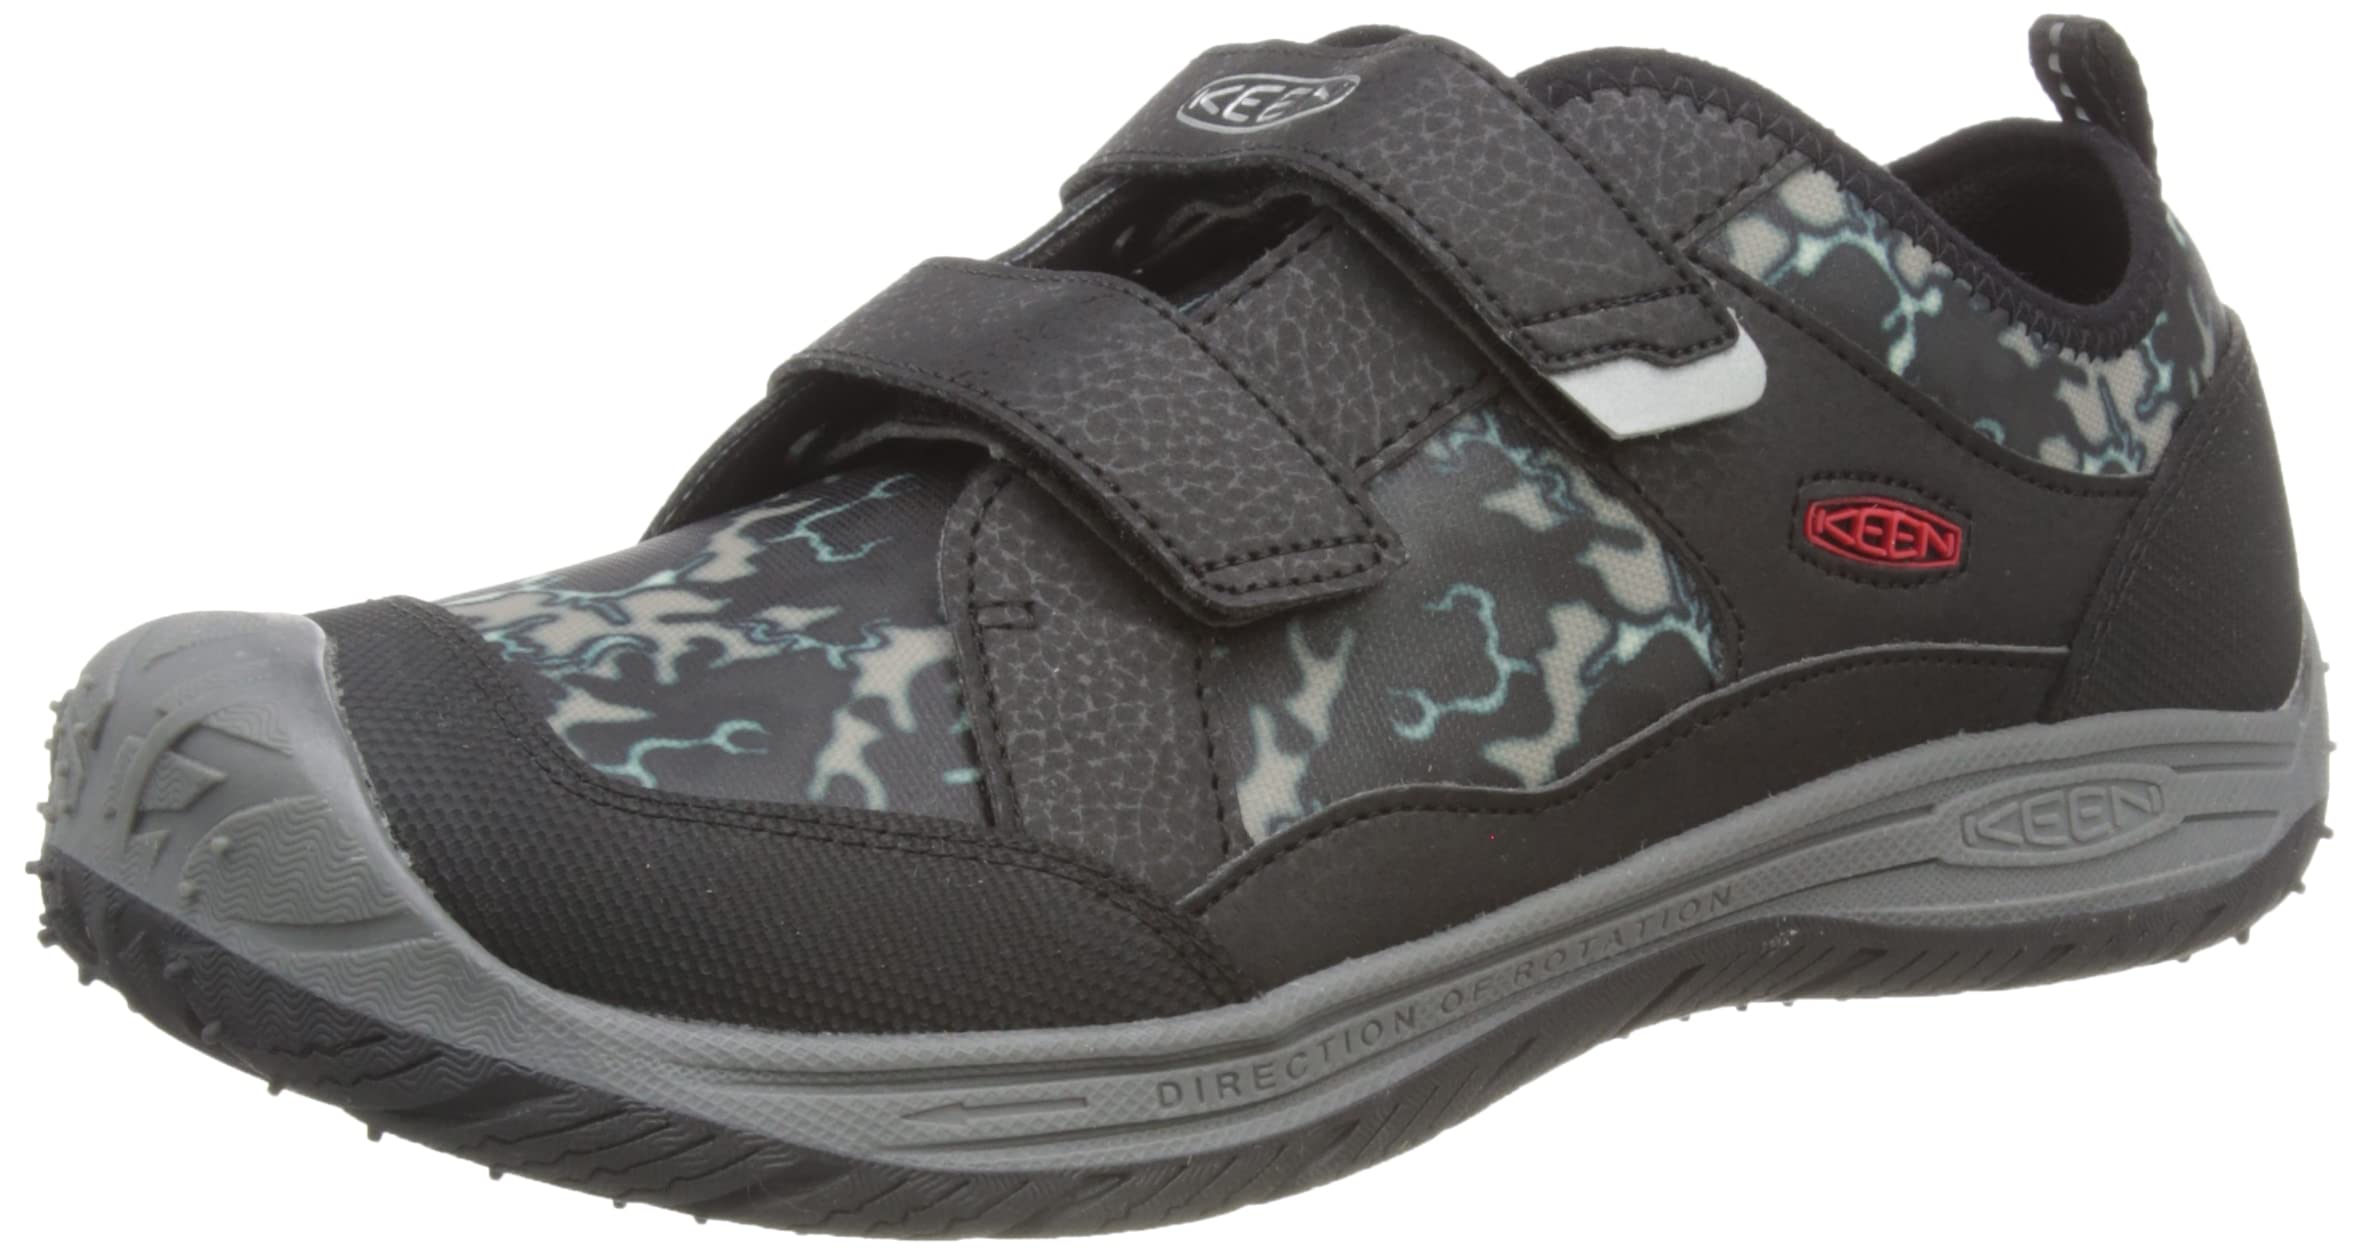 KEEN Unisex-Child Speed Hound Durable Comfortable Sneakers